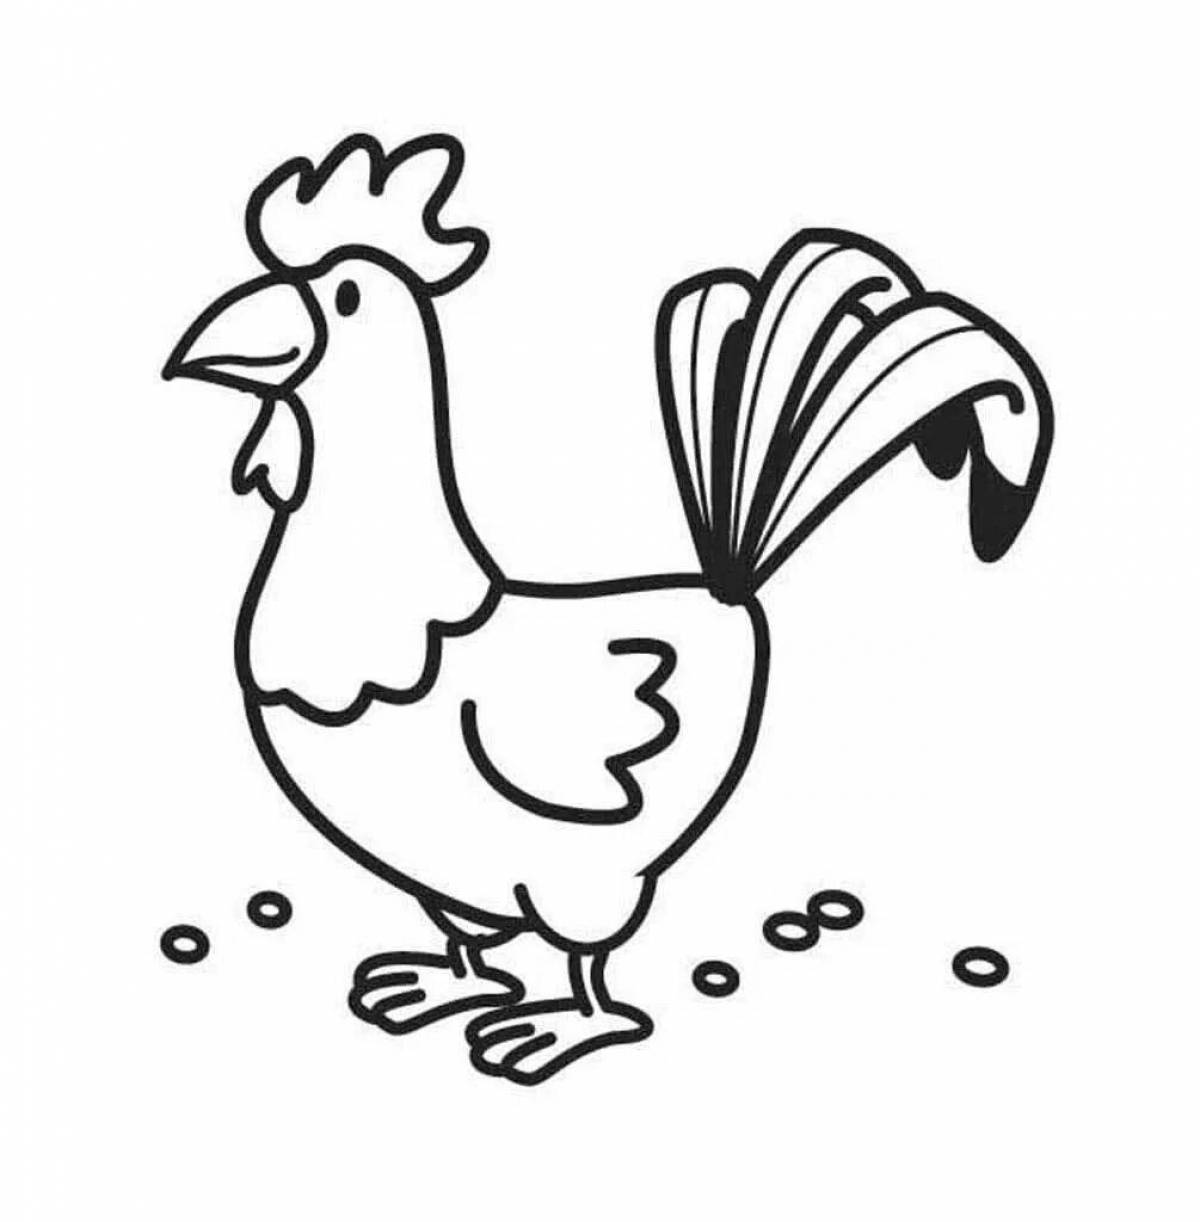 Colouring the nice rooster for kids